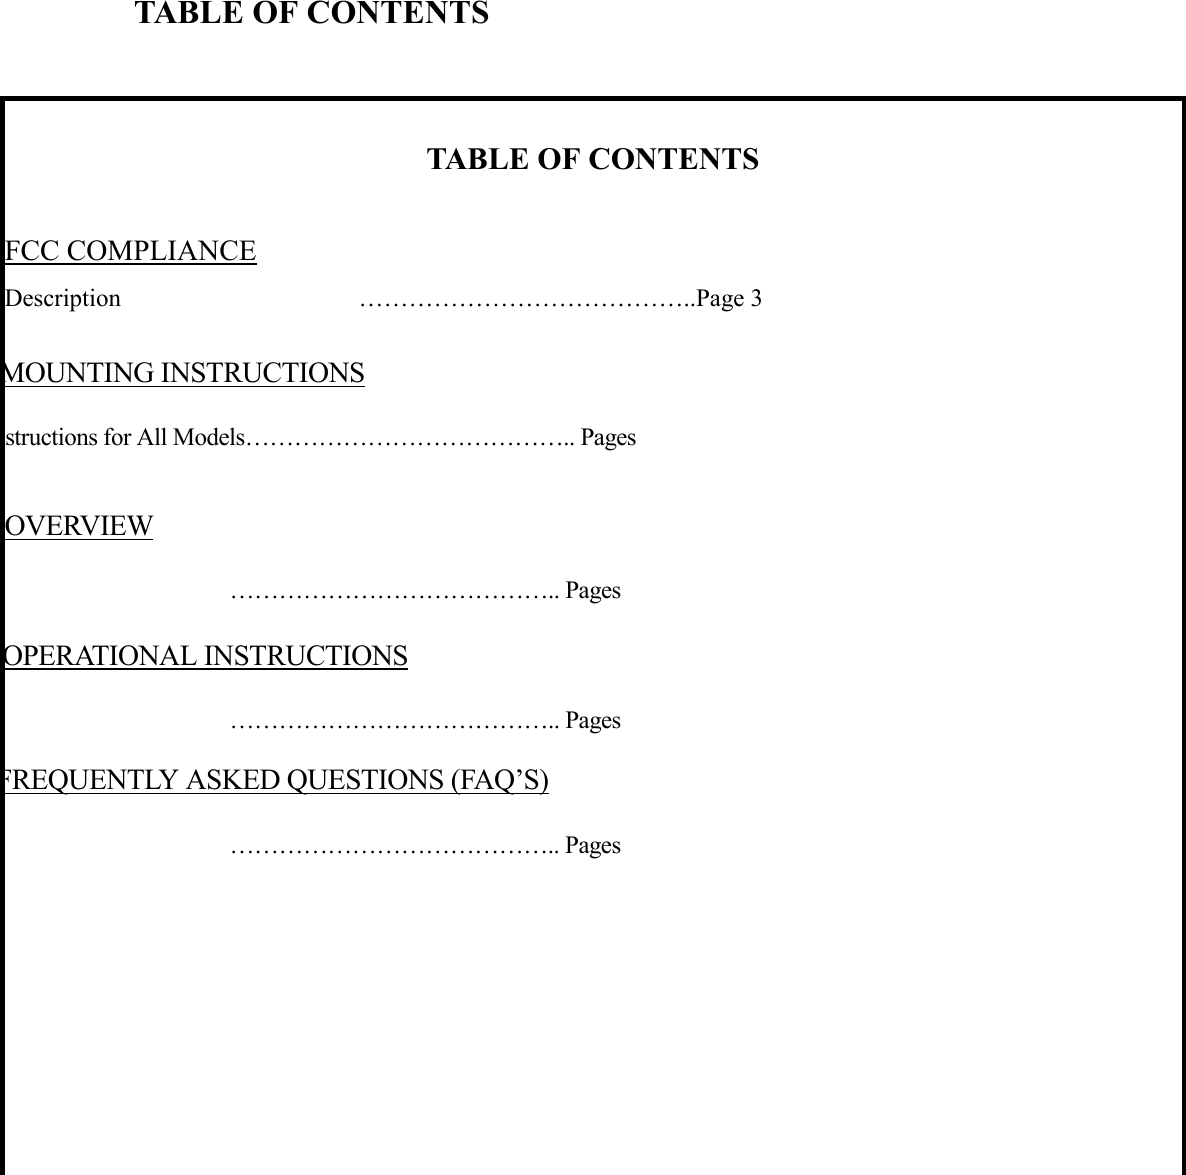    TABLE OF CONTENTS  TABLE OF CONTENTS  FCC COMPLIANCE Description                                      …………………………………..Page 3 MOUNTING INSTRUCTIONS nstructions for All Models………………………………….. Pages OVERVIEW    ………………………………….. Pages OPERATIONAL INSTRUCTIONS    ………………………………….. Pages FREQUENTLY ASKED QUESTIONS (FAQ’S)    ………………………………….. Pages 